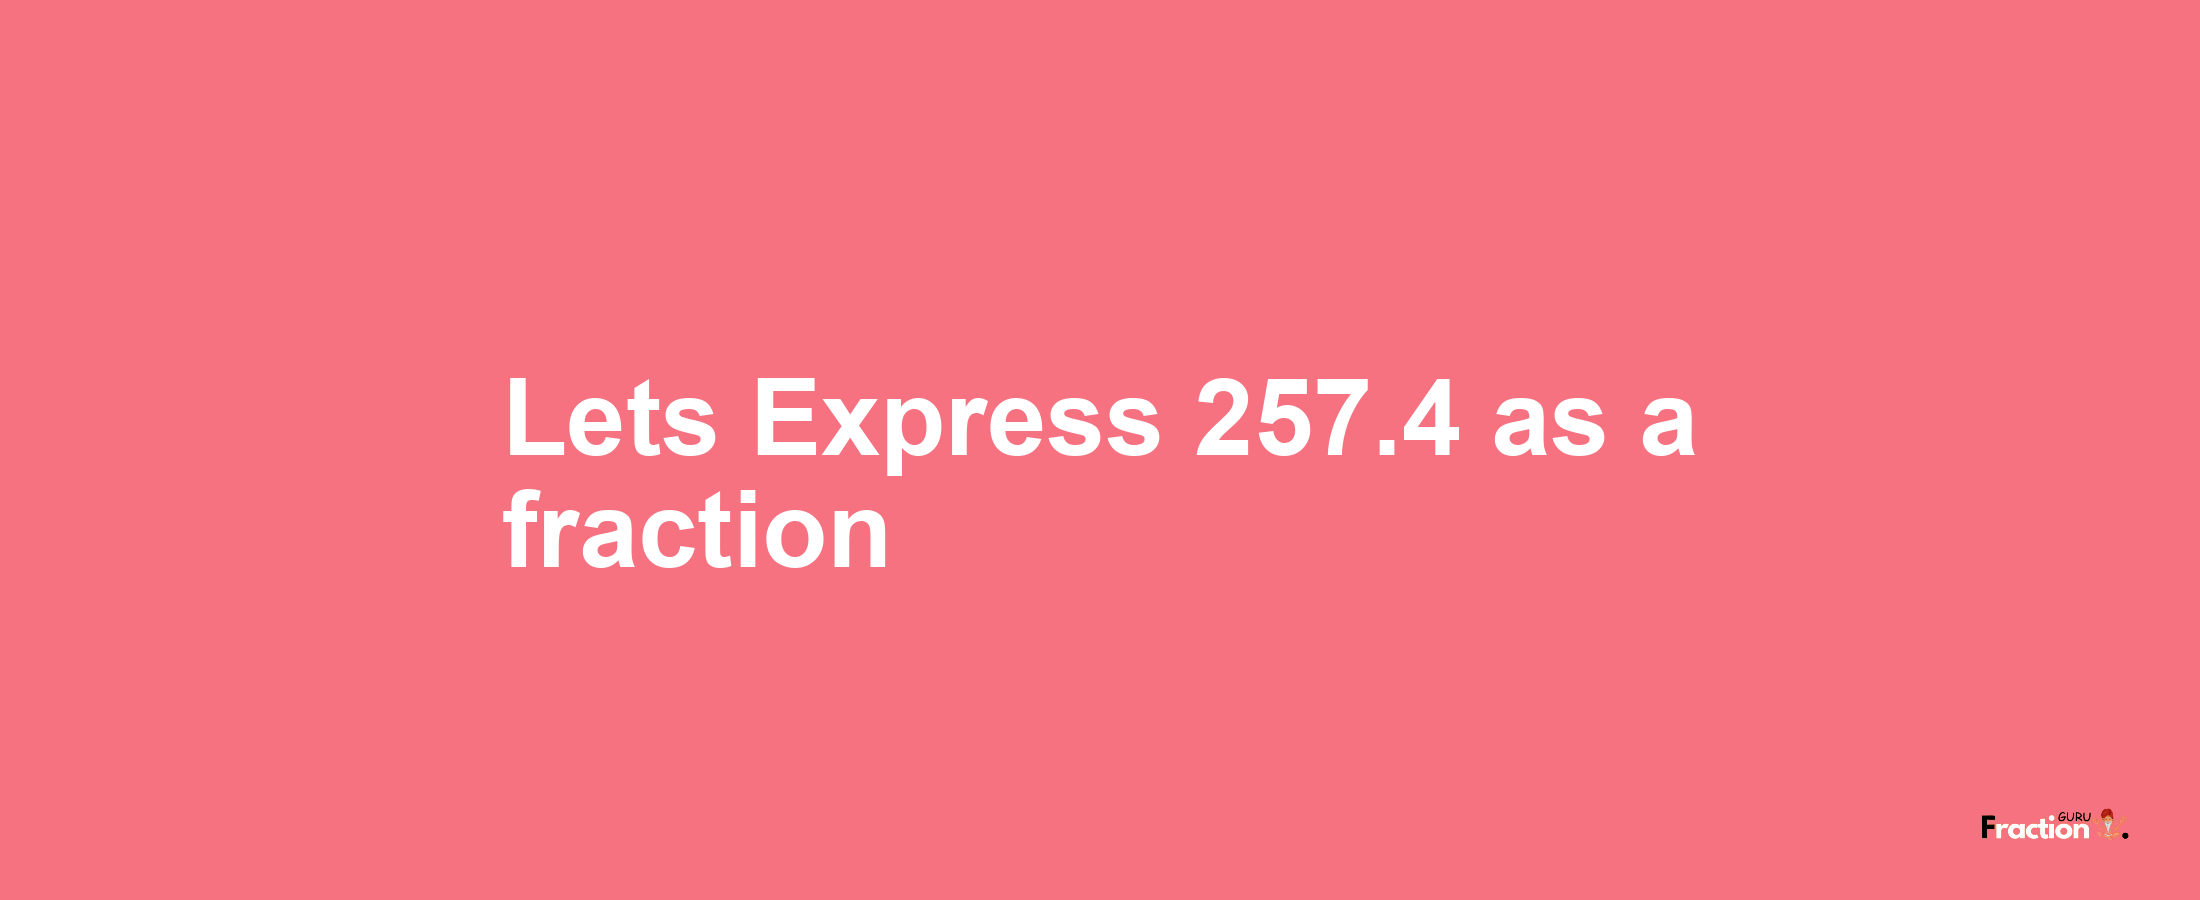 Lets Express 257.4 as afraction